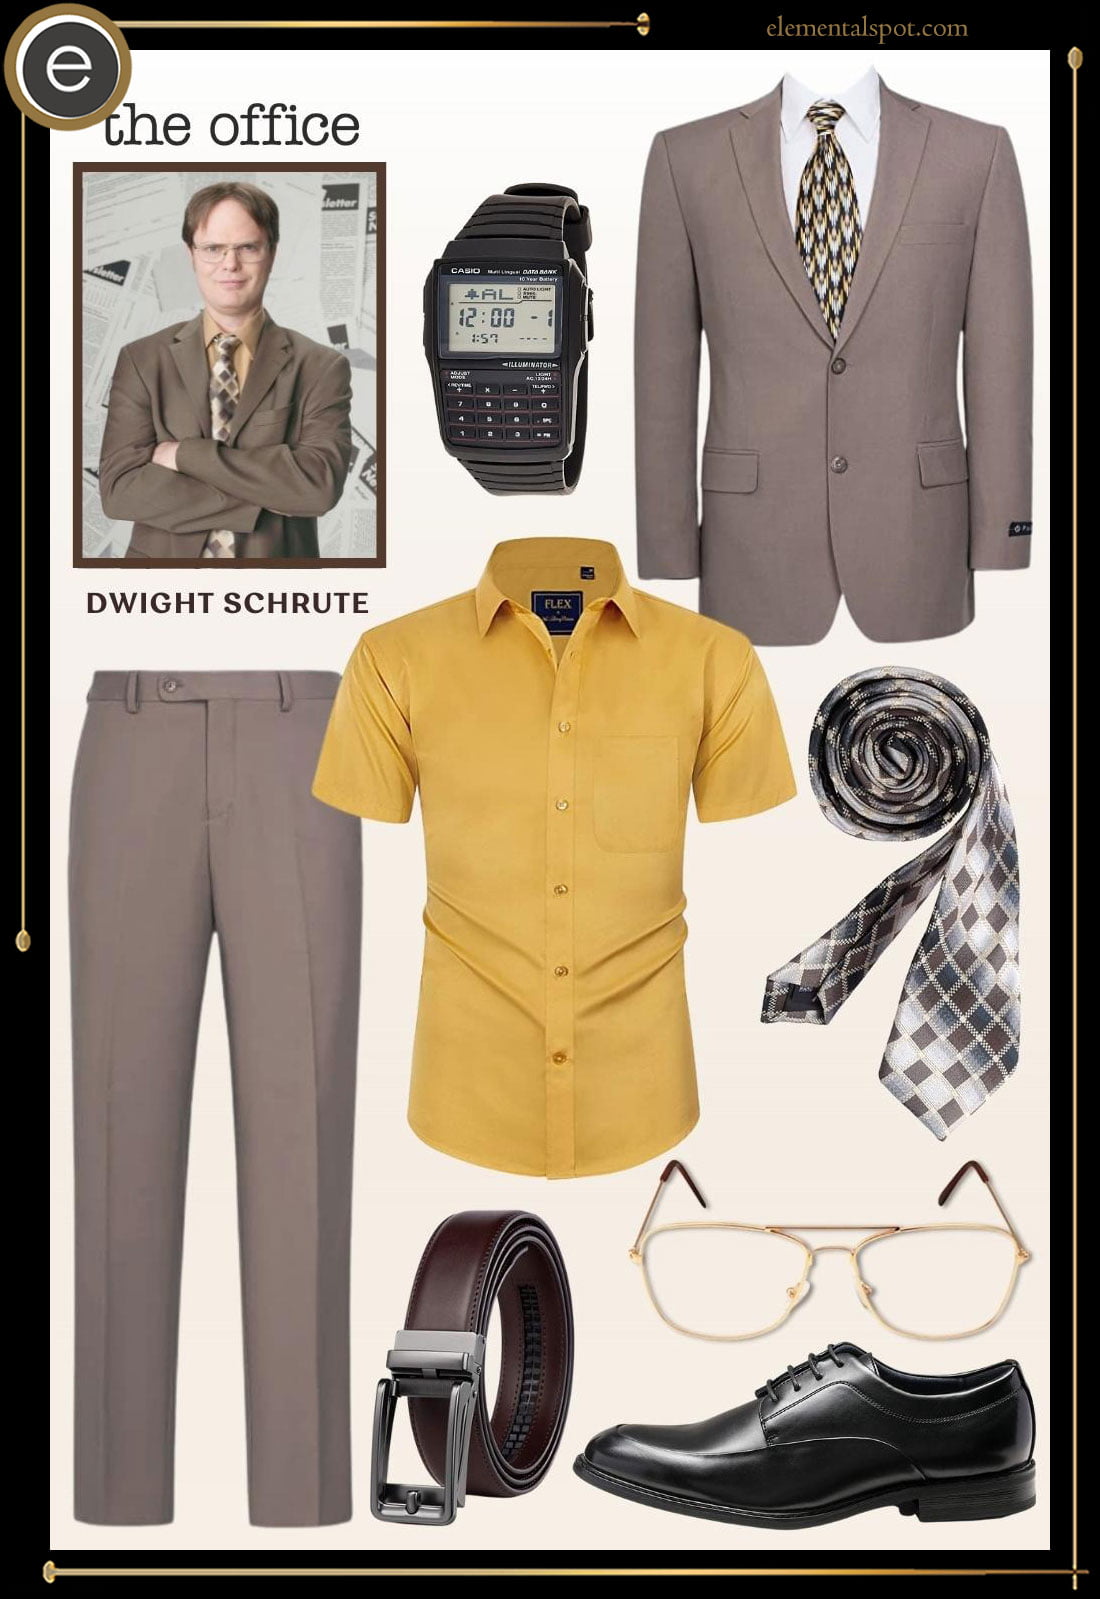 Dress Up Like Dwight Schrute from The Office - Elemental Spot